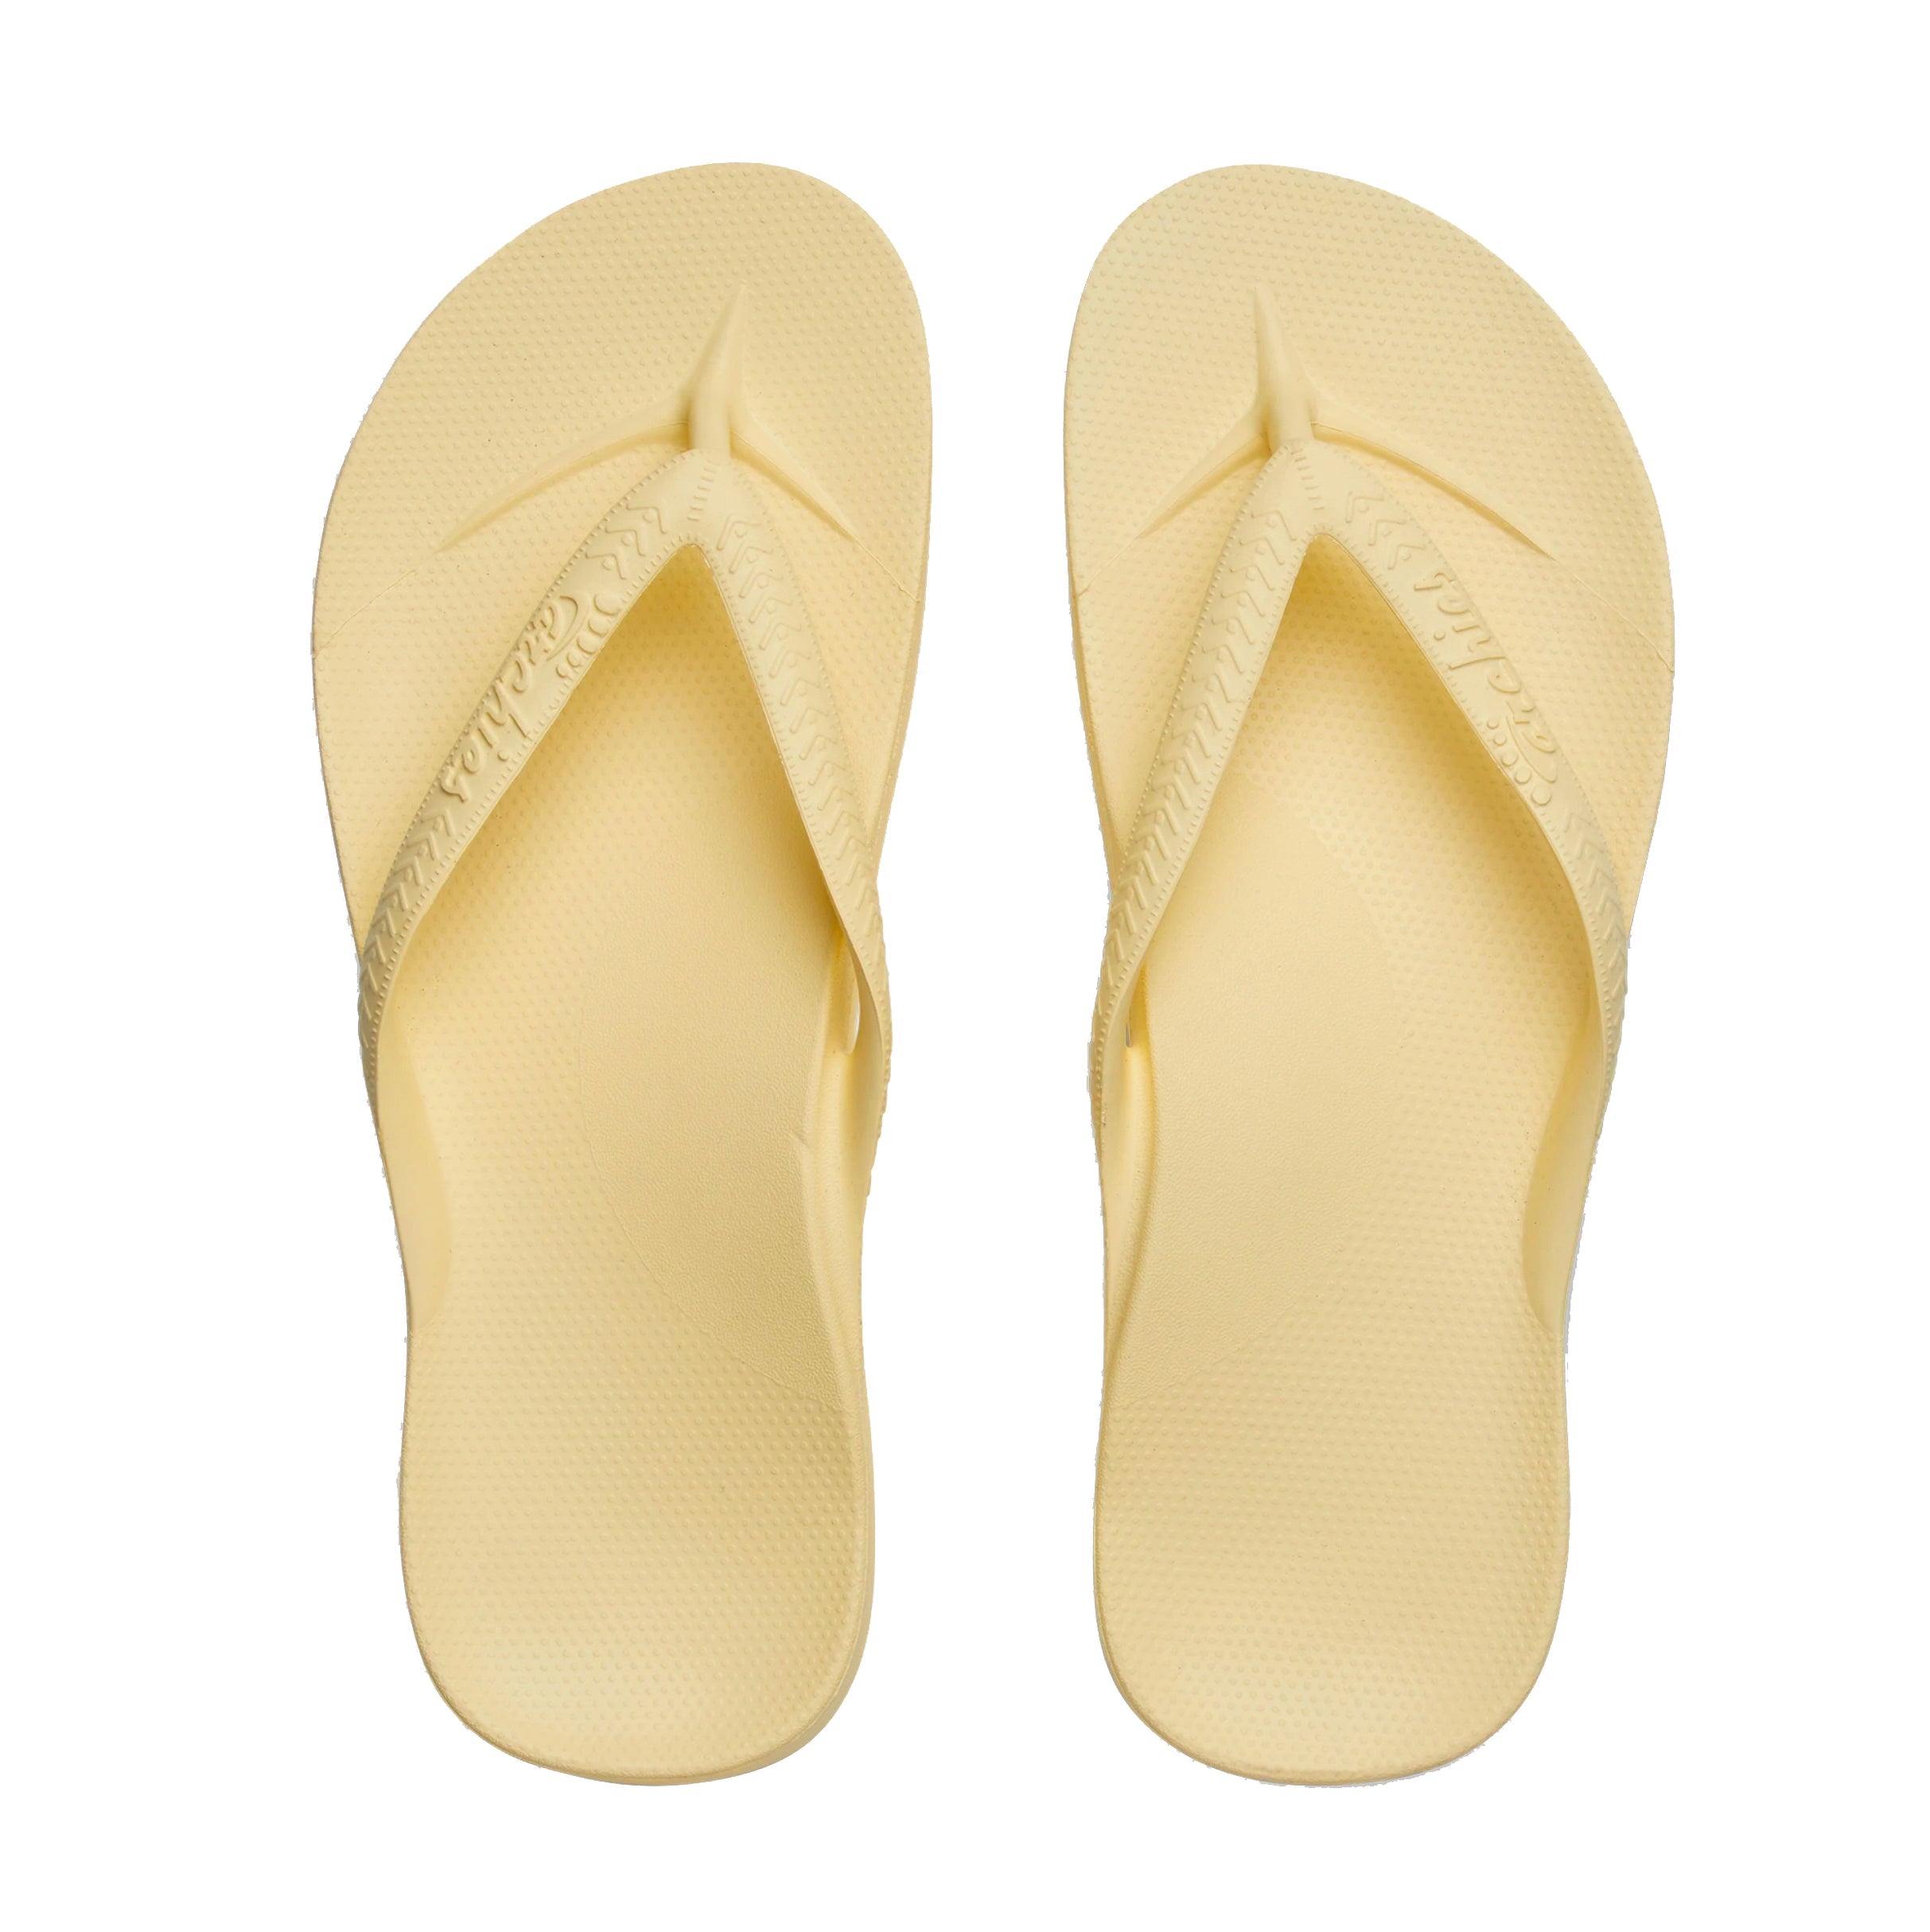 ARCHIES Footwear - Flip Flop Sandals Offering Great Arch Support And  Comfort - Taupe